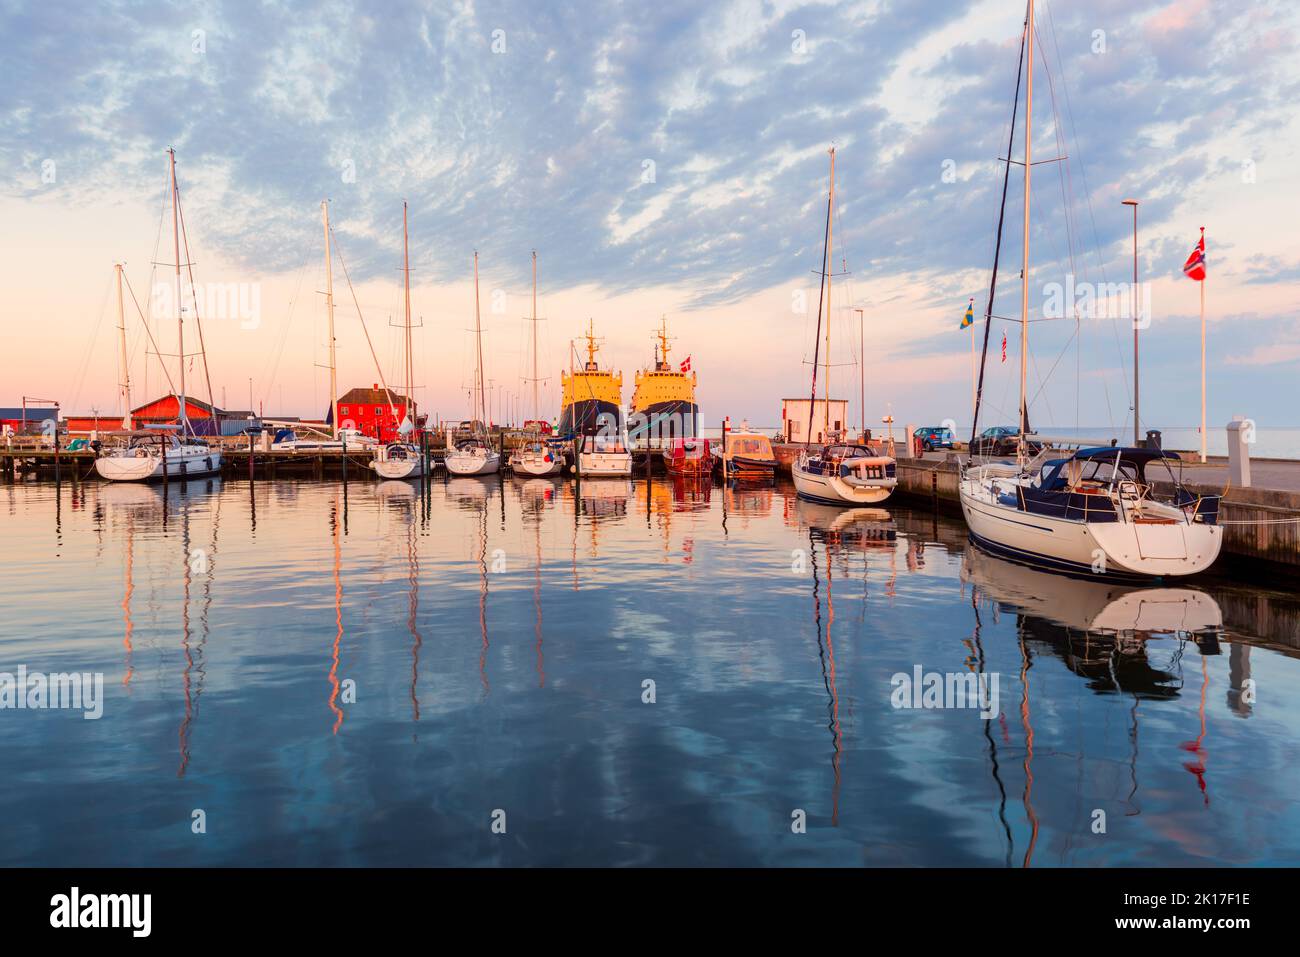 Small Harbor of Hals, Denmark around Sunset. Hals is a small town on the east coast of the Jutland peninsula in northern Denmark. Stock Photo